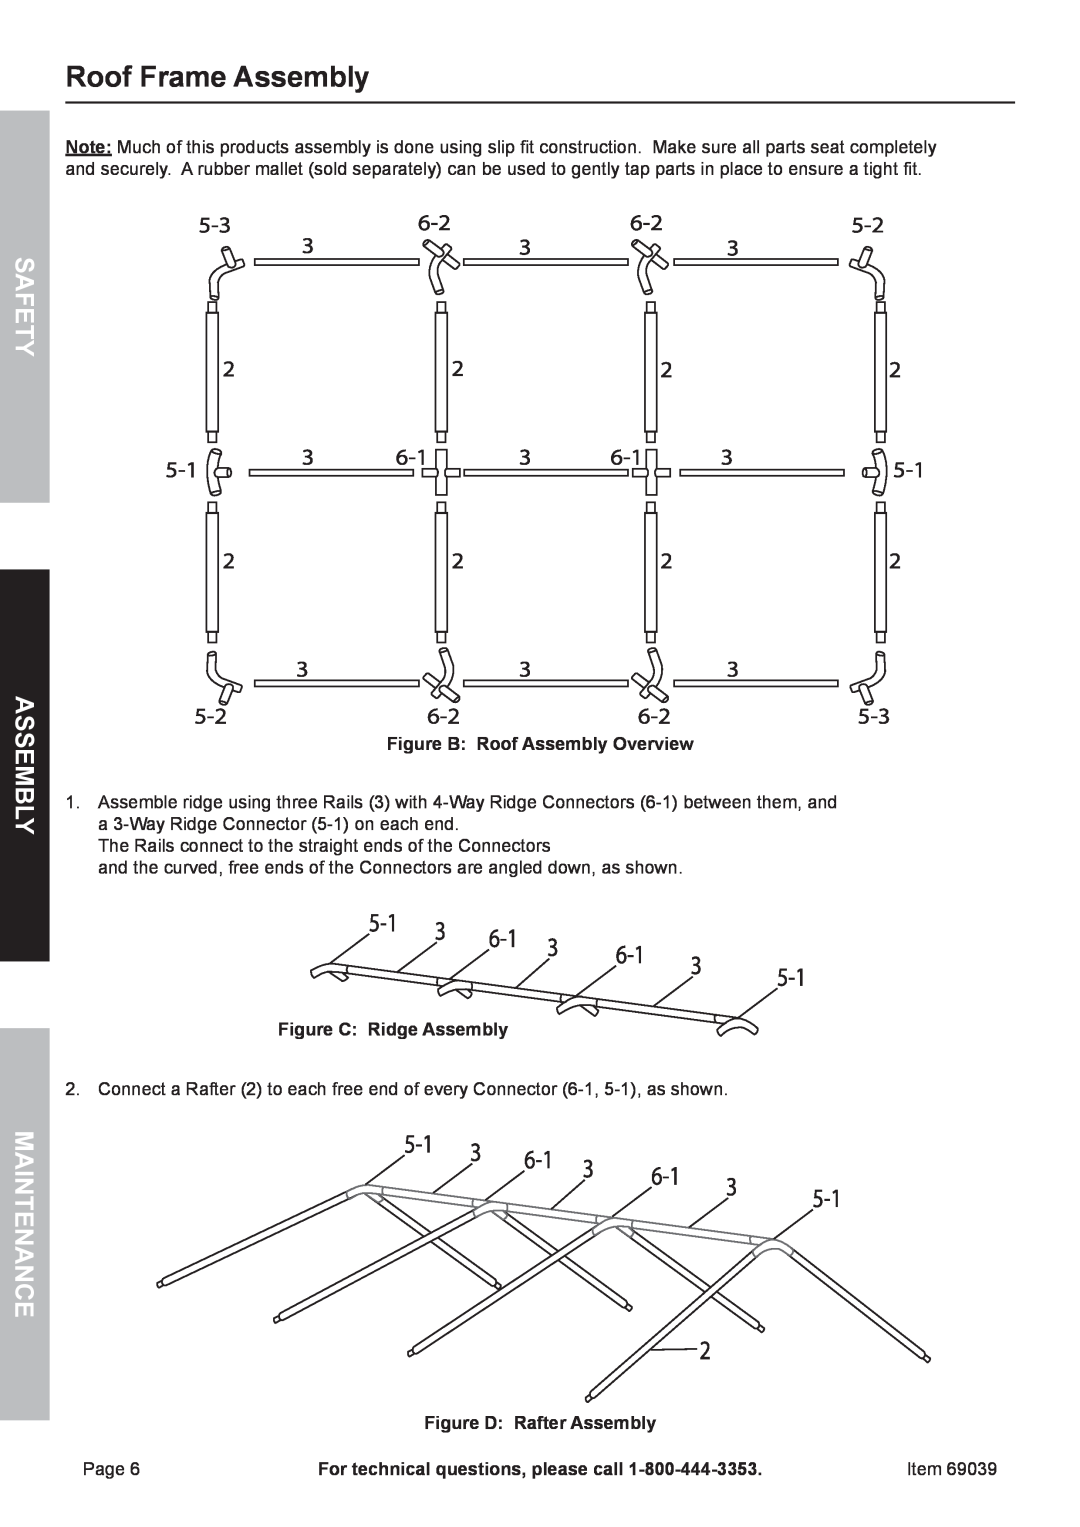 Harbor Freight Tools 69039 Roof Frame Assembly, Figure B Roof Assembly Overview, Figure C Ridge Assembly, Safety Assembly 